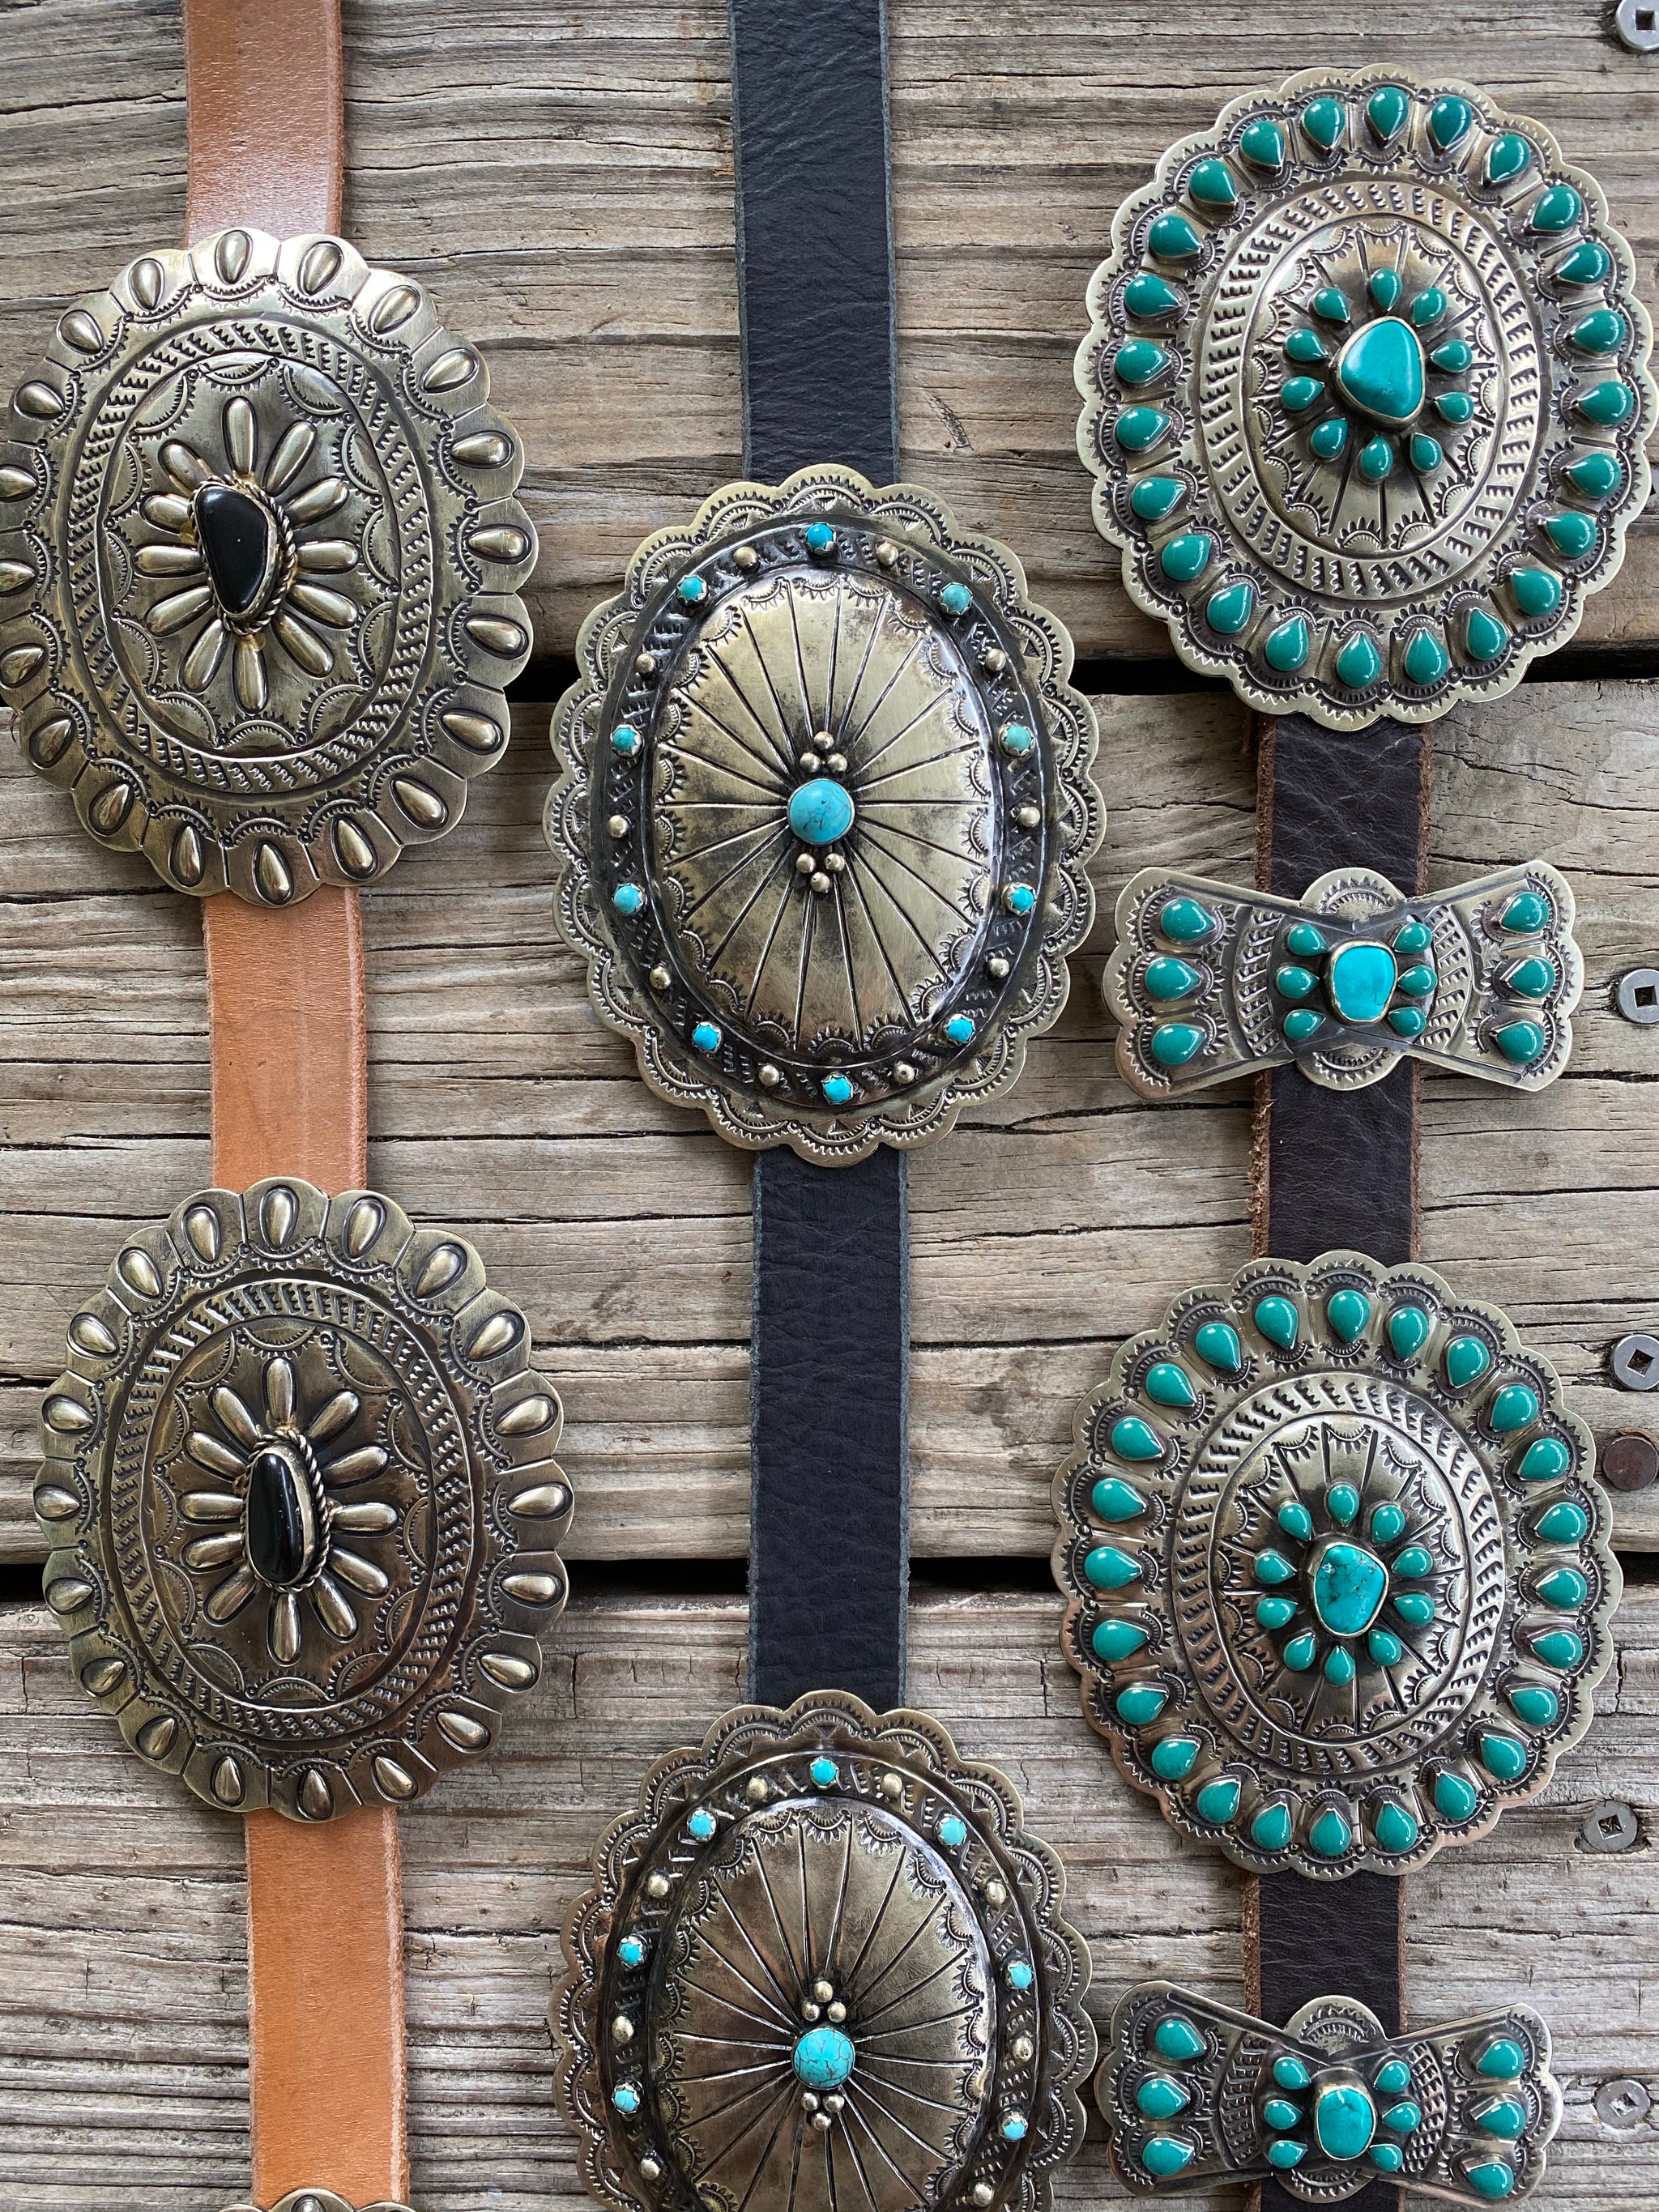 Authentic Turquoise & Black Onyx Etched Silver Concho Leather Belts Dark Chocolate Brown Leather/Silver Thunderbird (3rd from The Left)